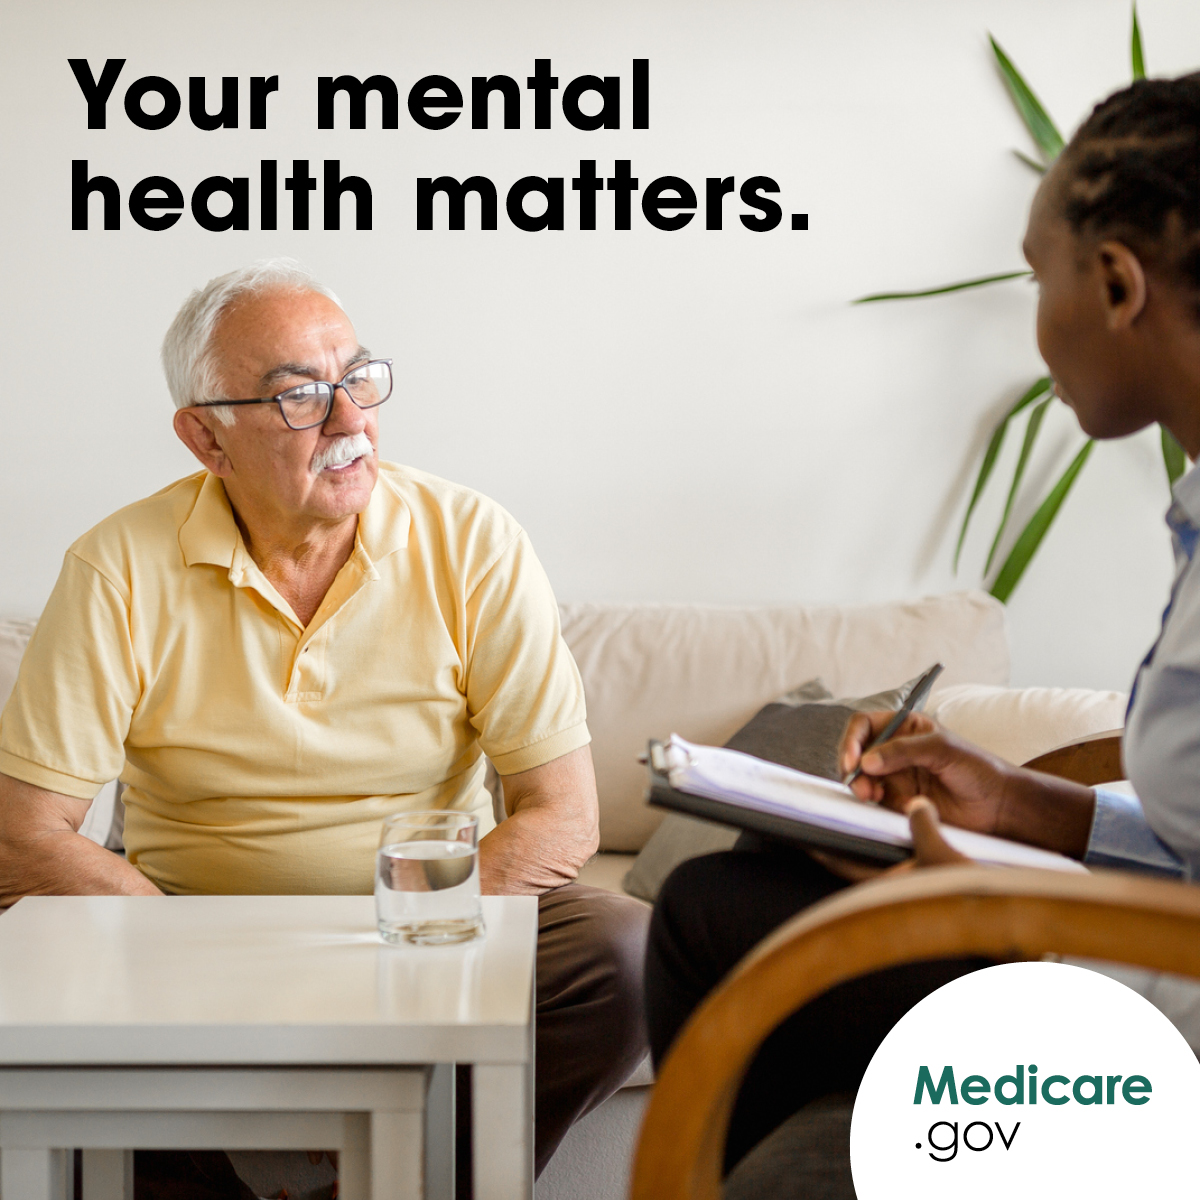 Taking care of your mental health is important at every stage of life. Talk with your doctor to see if mental health services are right for you—Medicare covers many of them: go.medicare.gov/3wil7XL